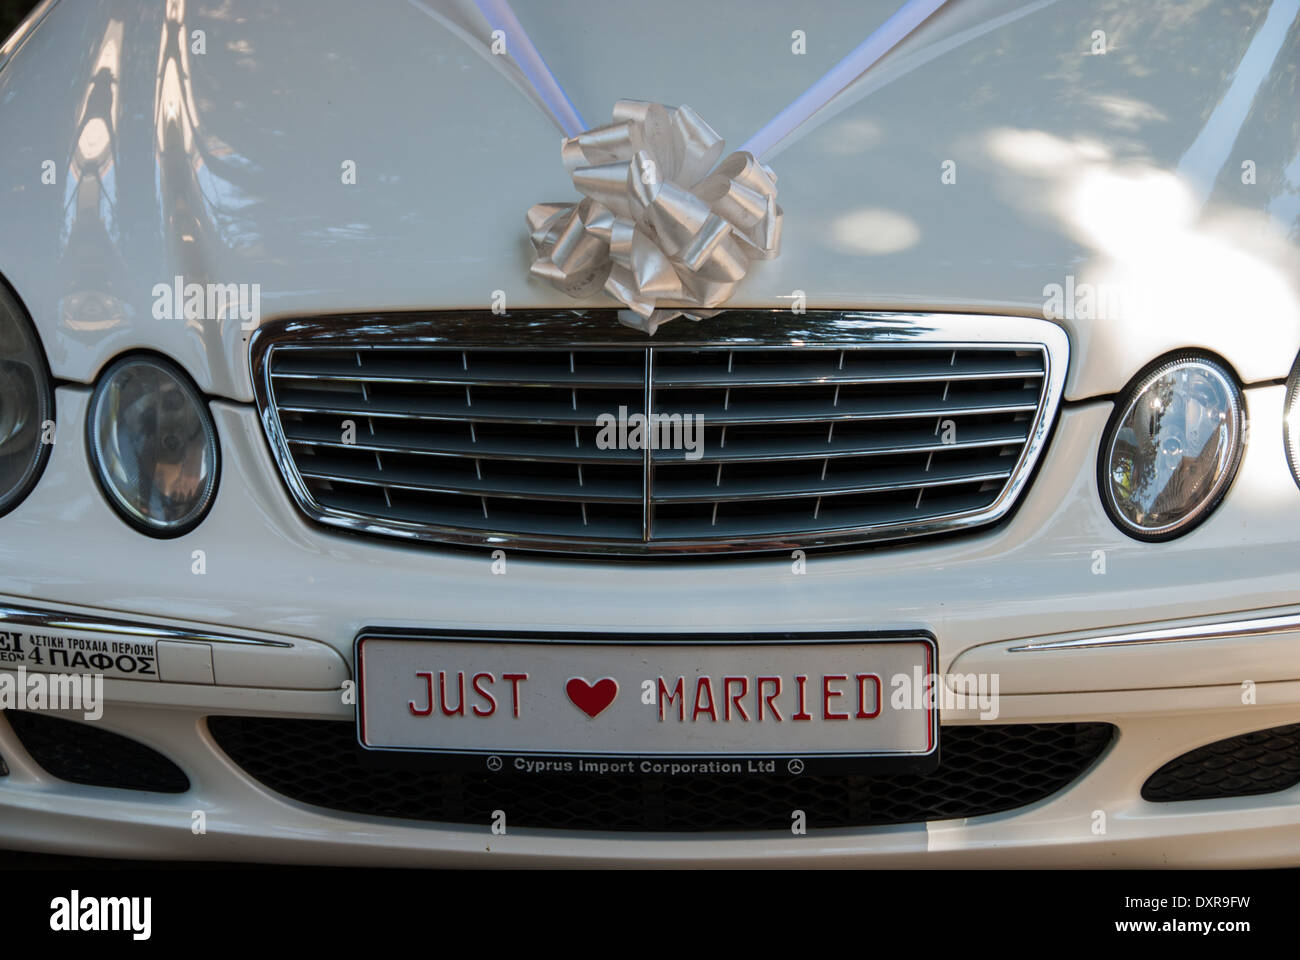 Wedding limousine with custom number plate. Stock Photo